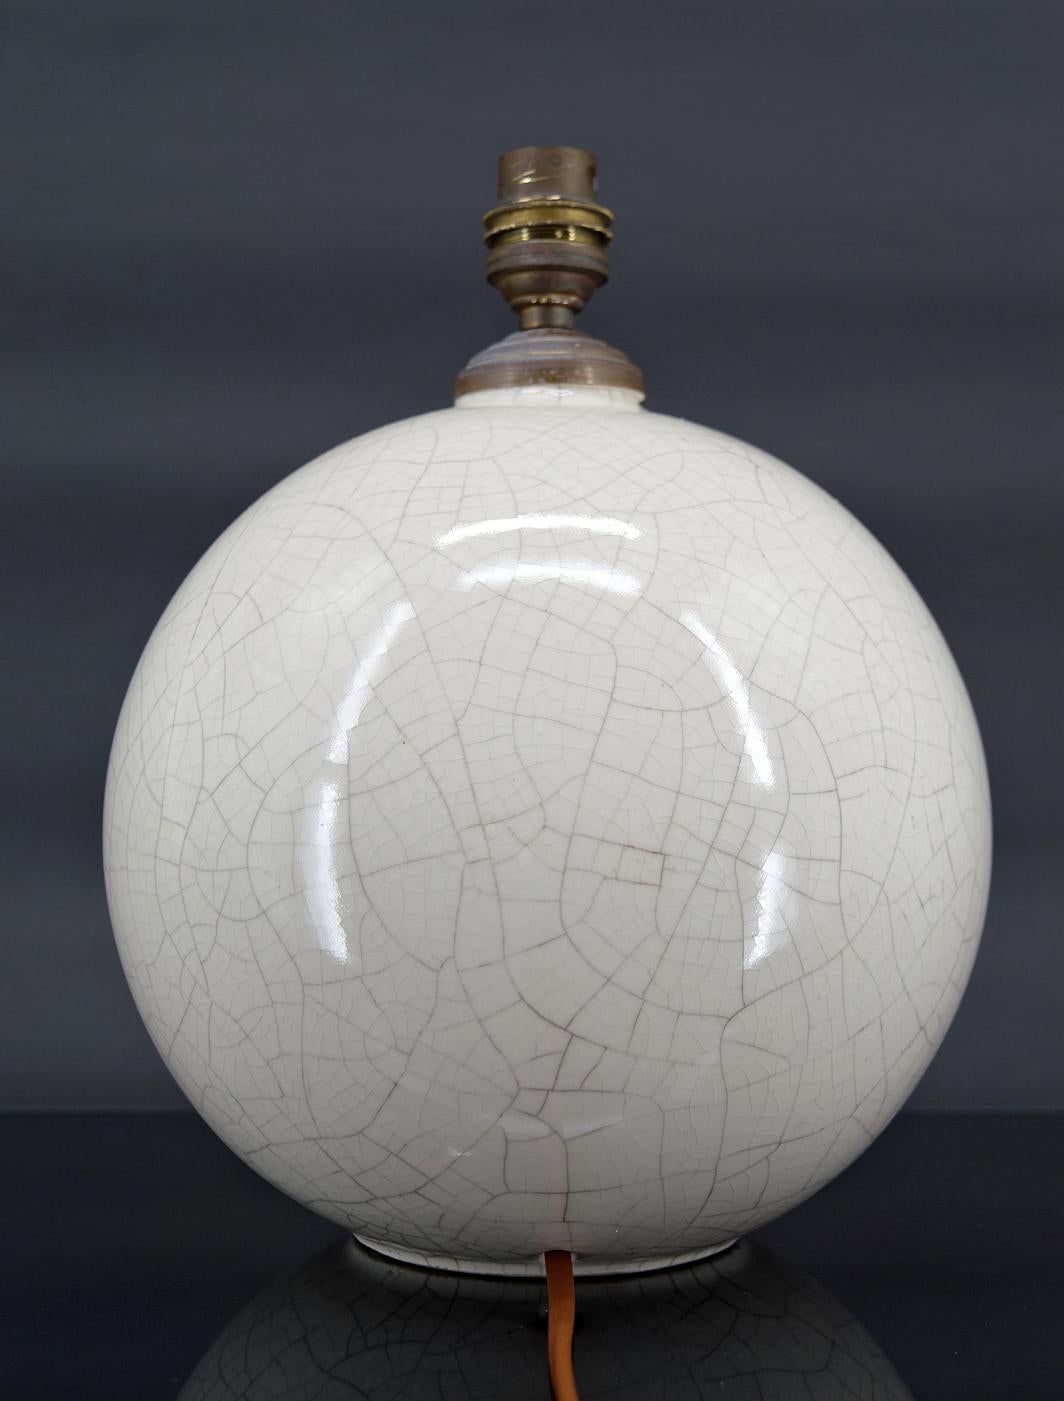 Cracked white ball lamp.

Attributed to Jean Besnard for Jacques-Émile Ruhlmann, France, circa 1920
Unsigned.

In excellent condition, new electricity.

Dimensions:
height 25 cm
diameter 20 cm